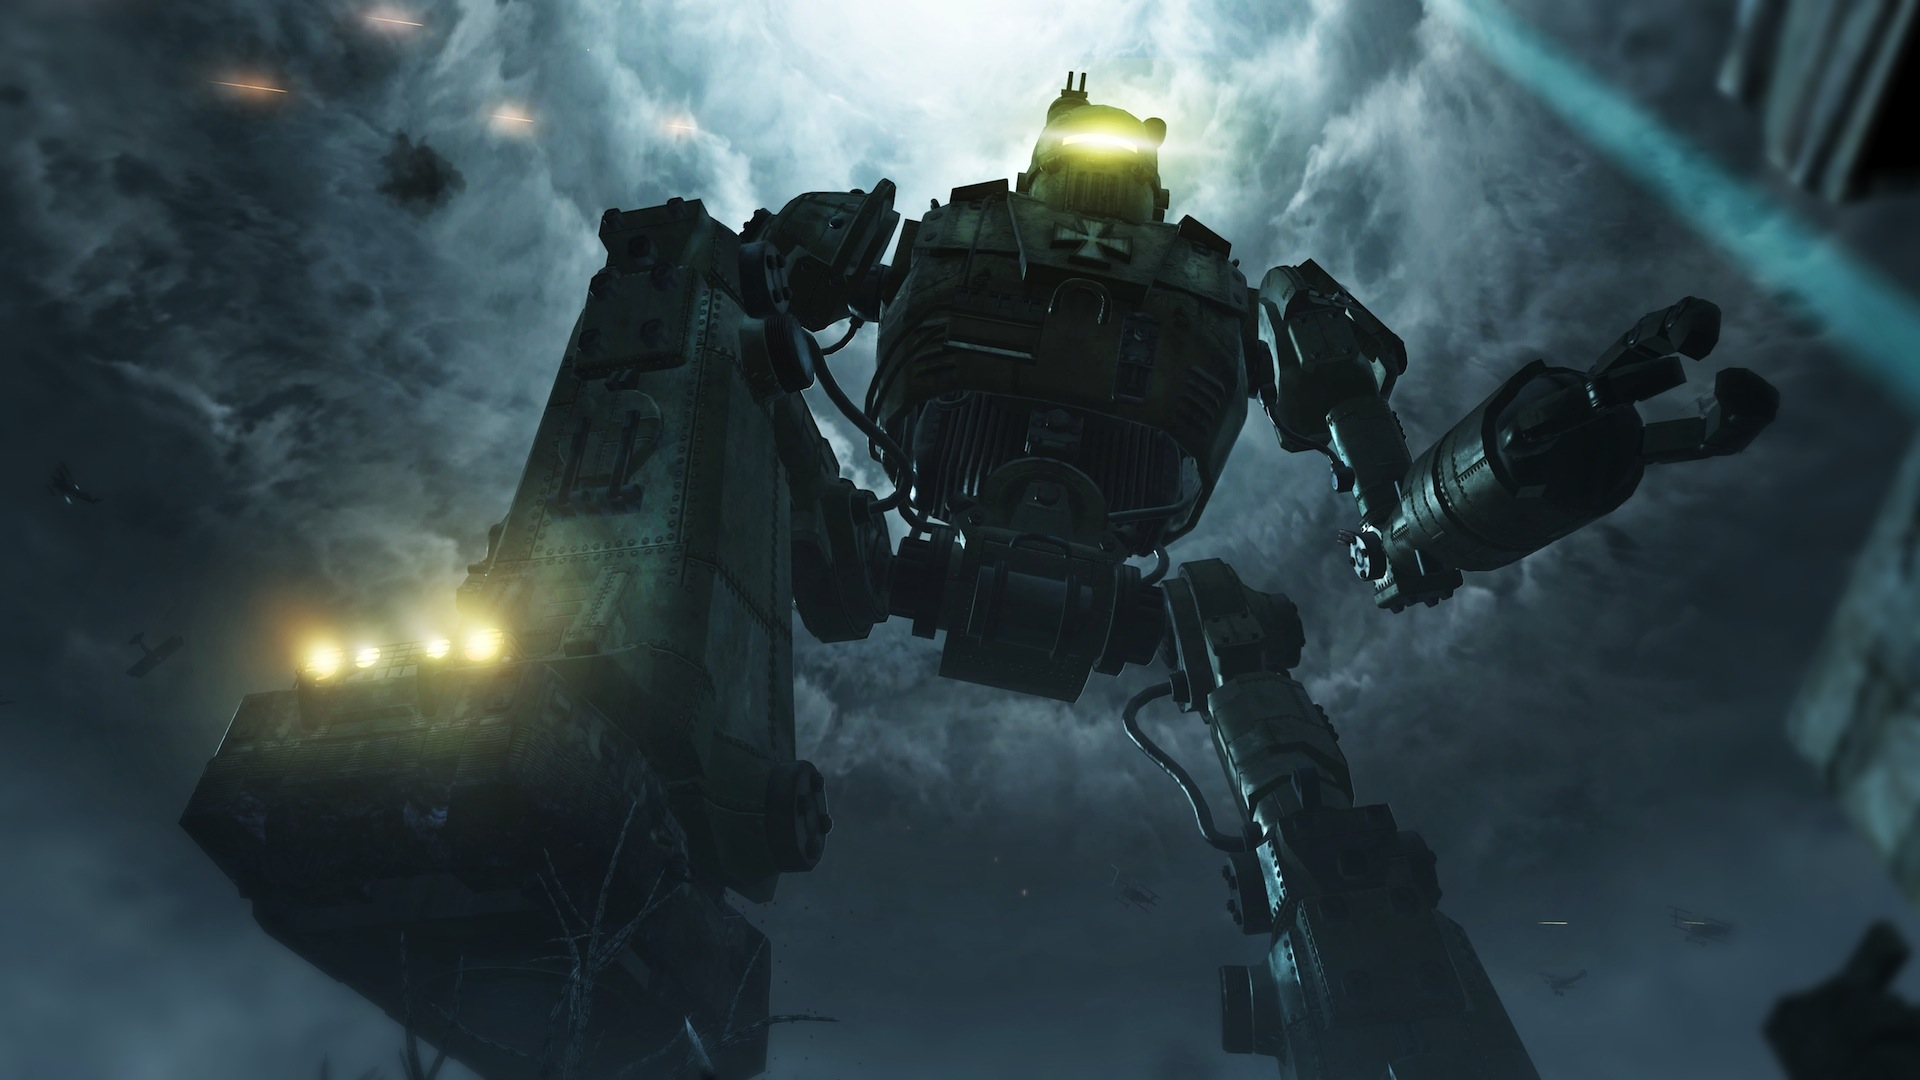 https://static.wikia.nocookie.net/callofduty/images/f/fa/Giant_mech_Origins_BOII.png/revision/latest?cb=20130827204332